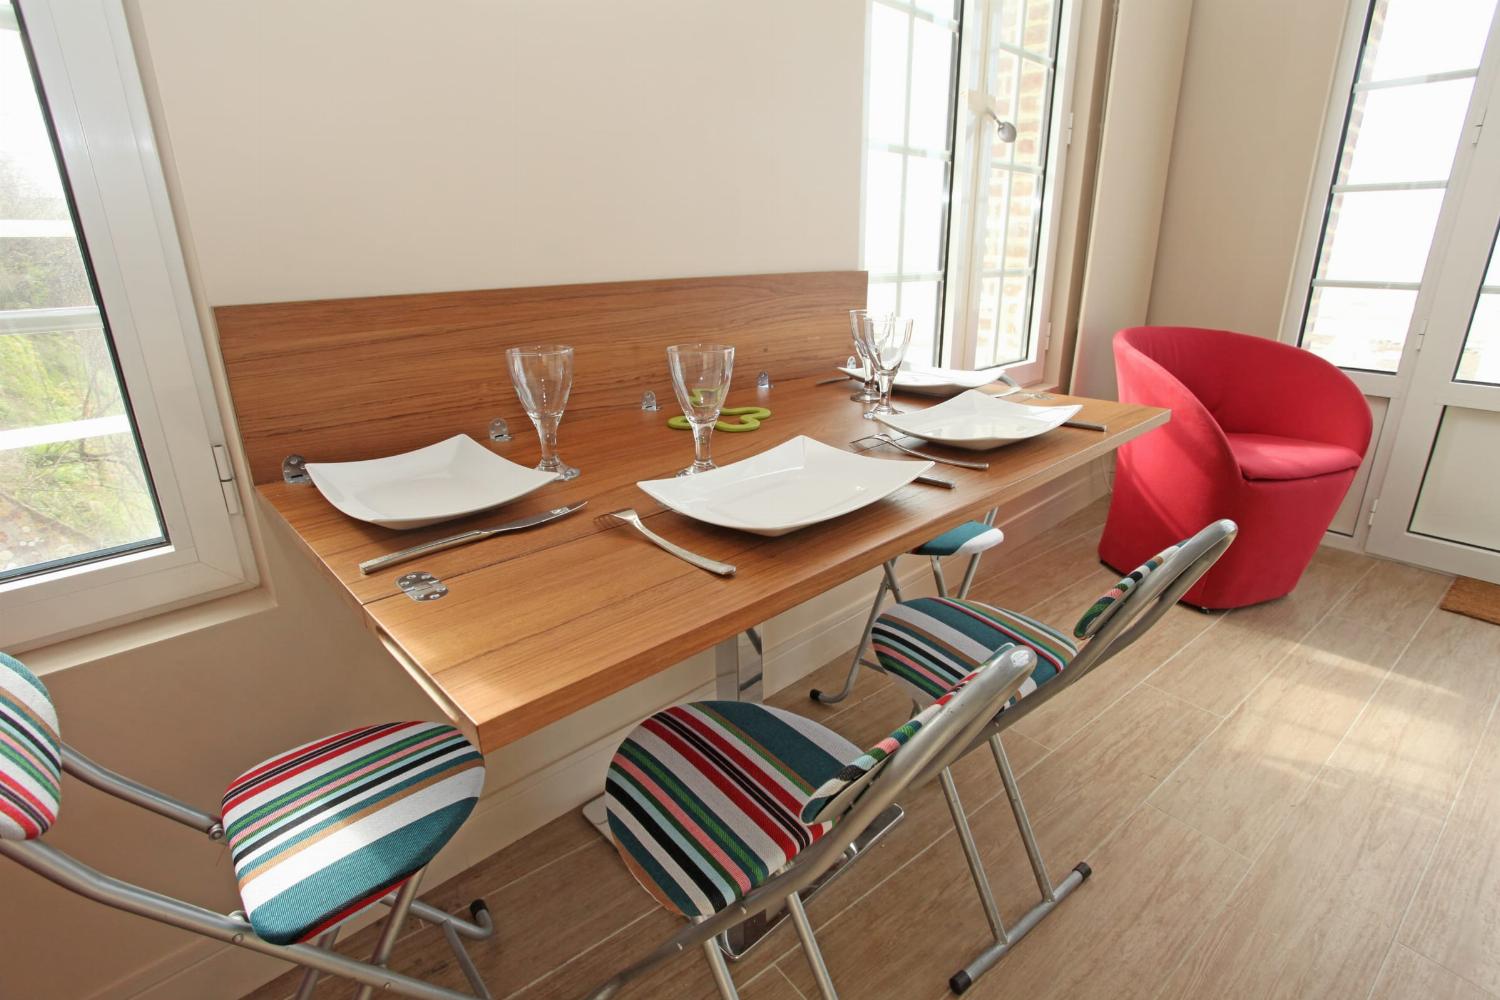 Dining room | Rental home in Brittany